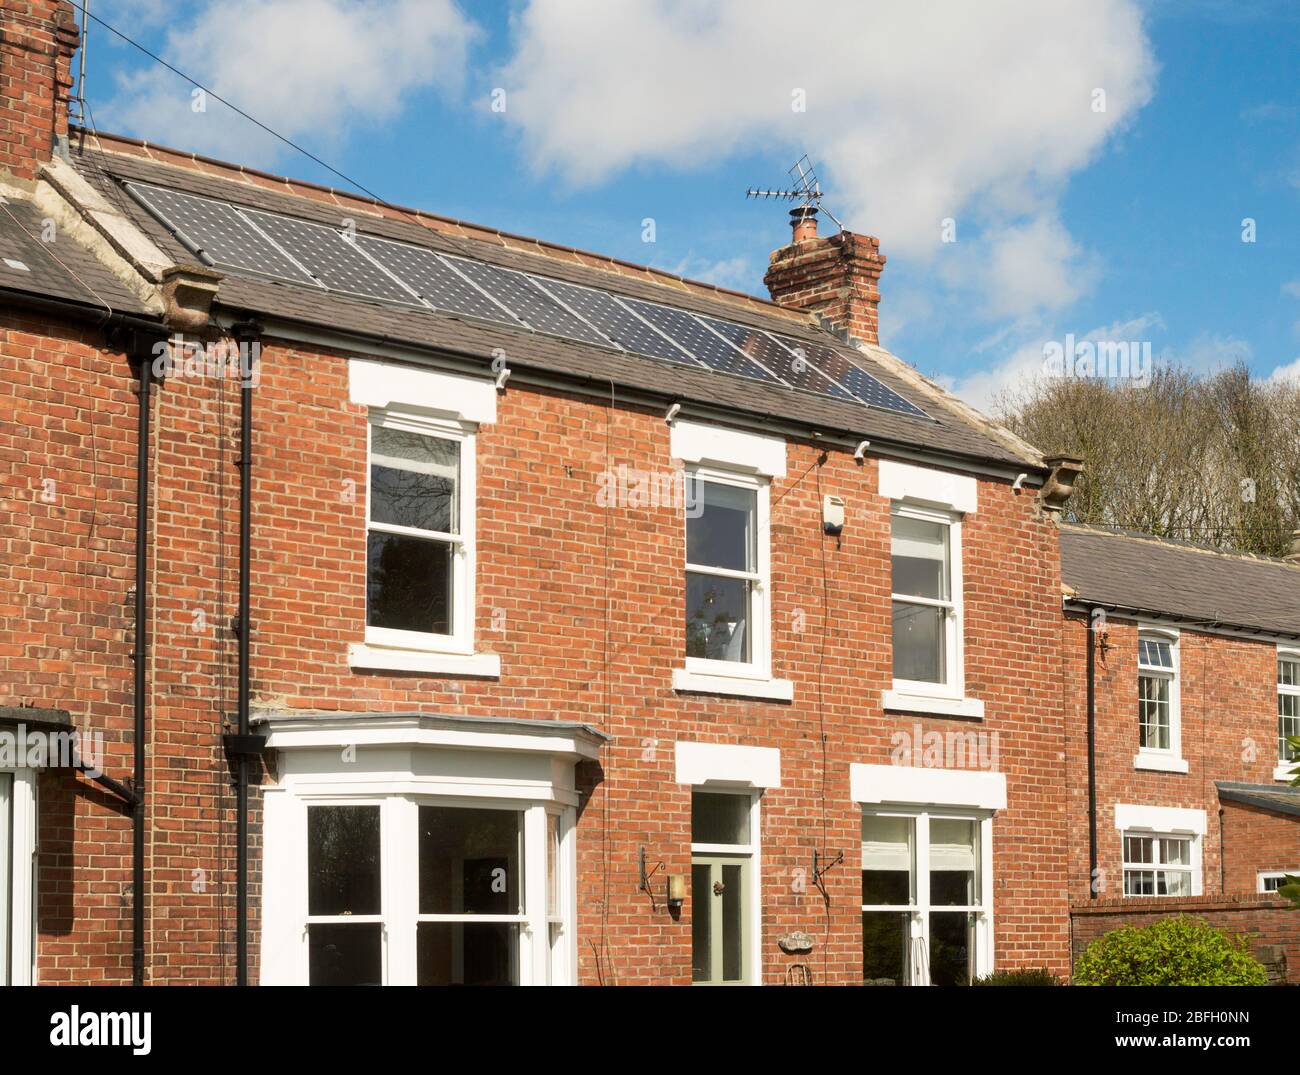 Solar panels recessed into the slate roof of an older house, England, UK Stock Photo